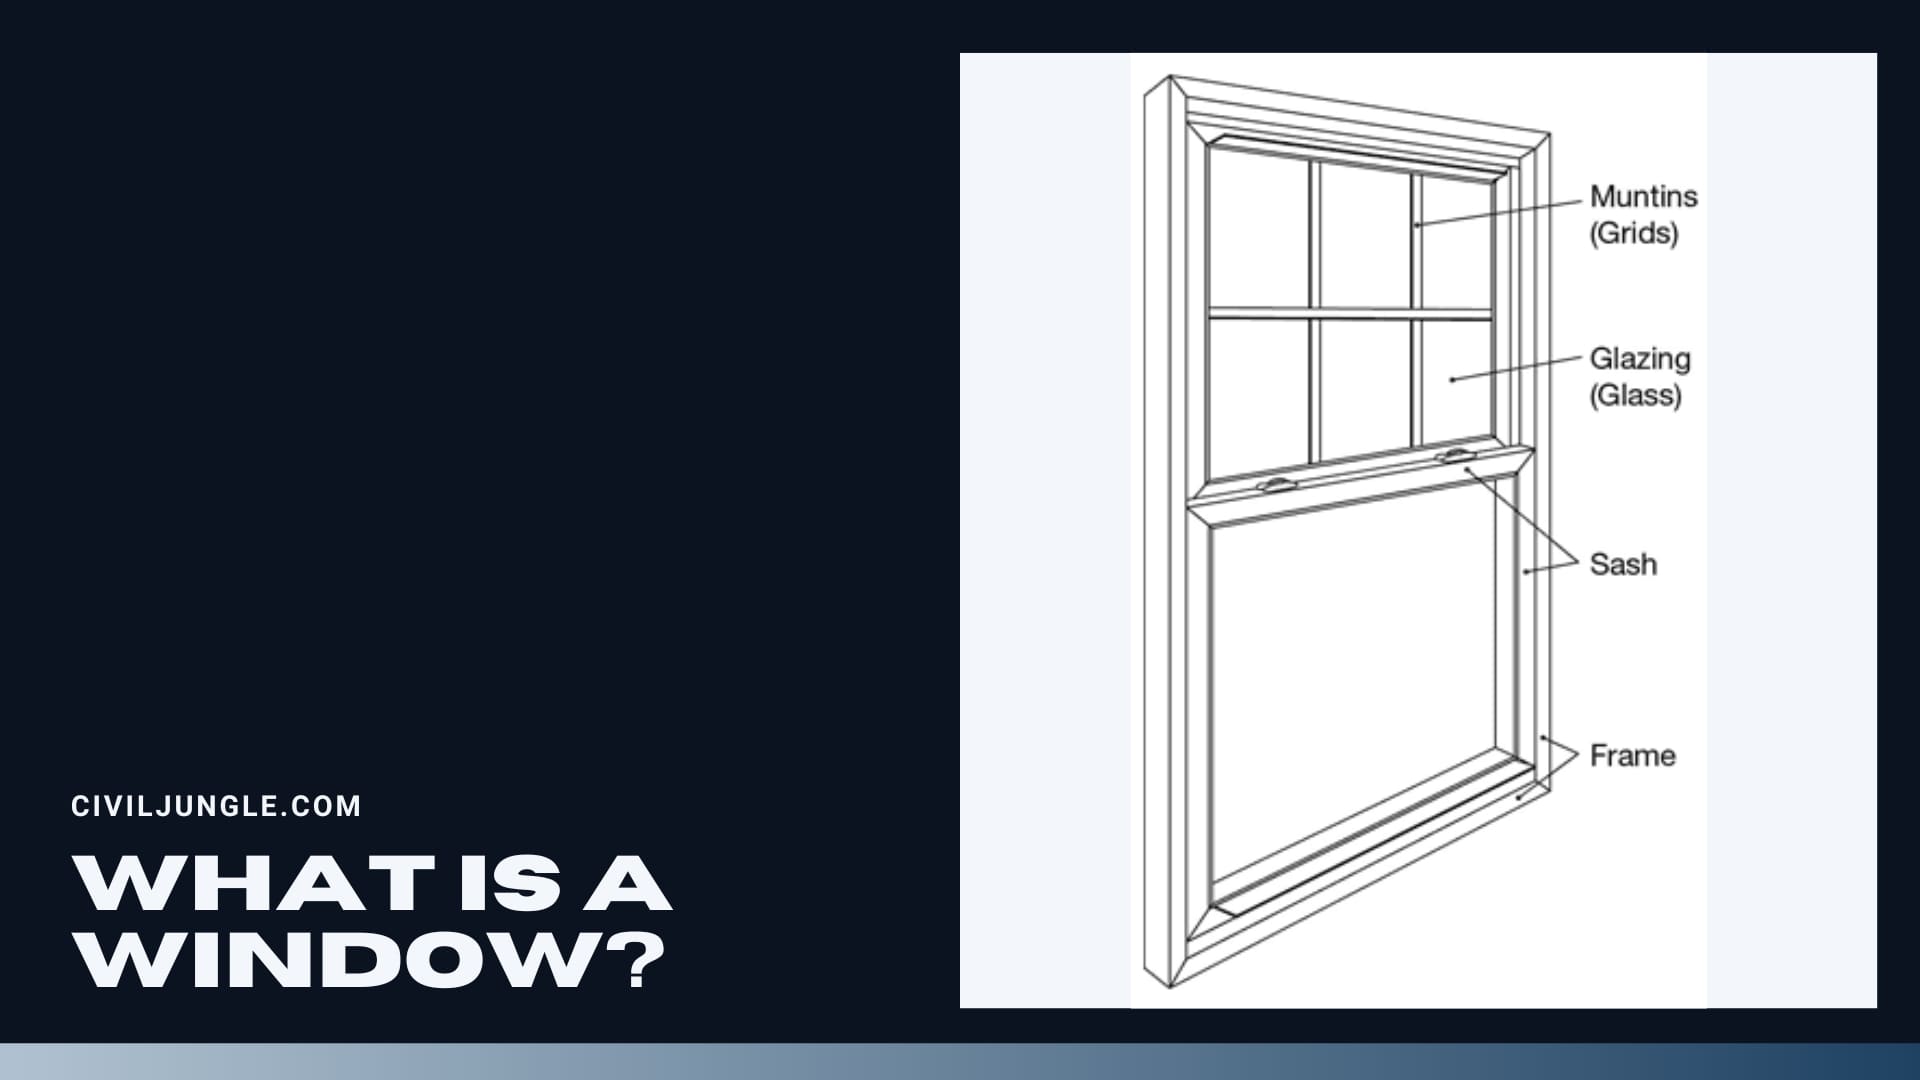 What Is a Window?